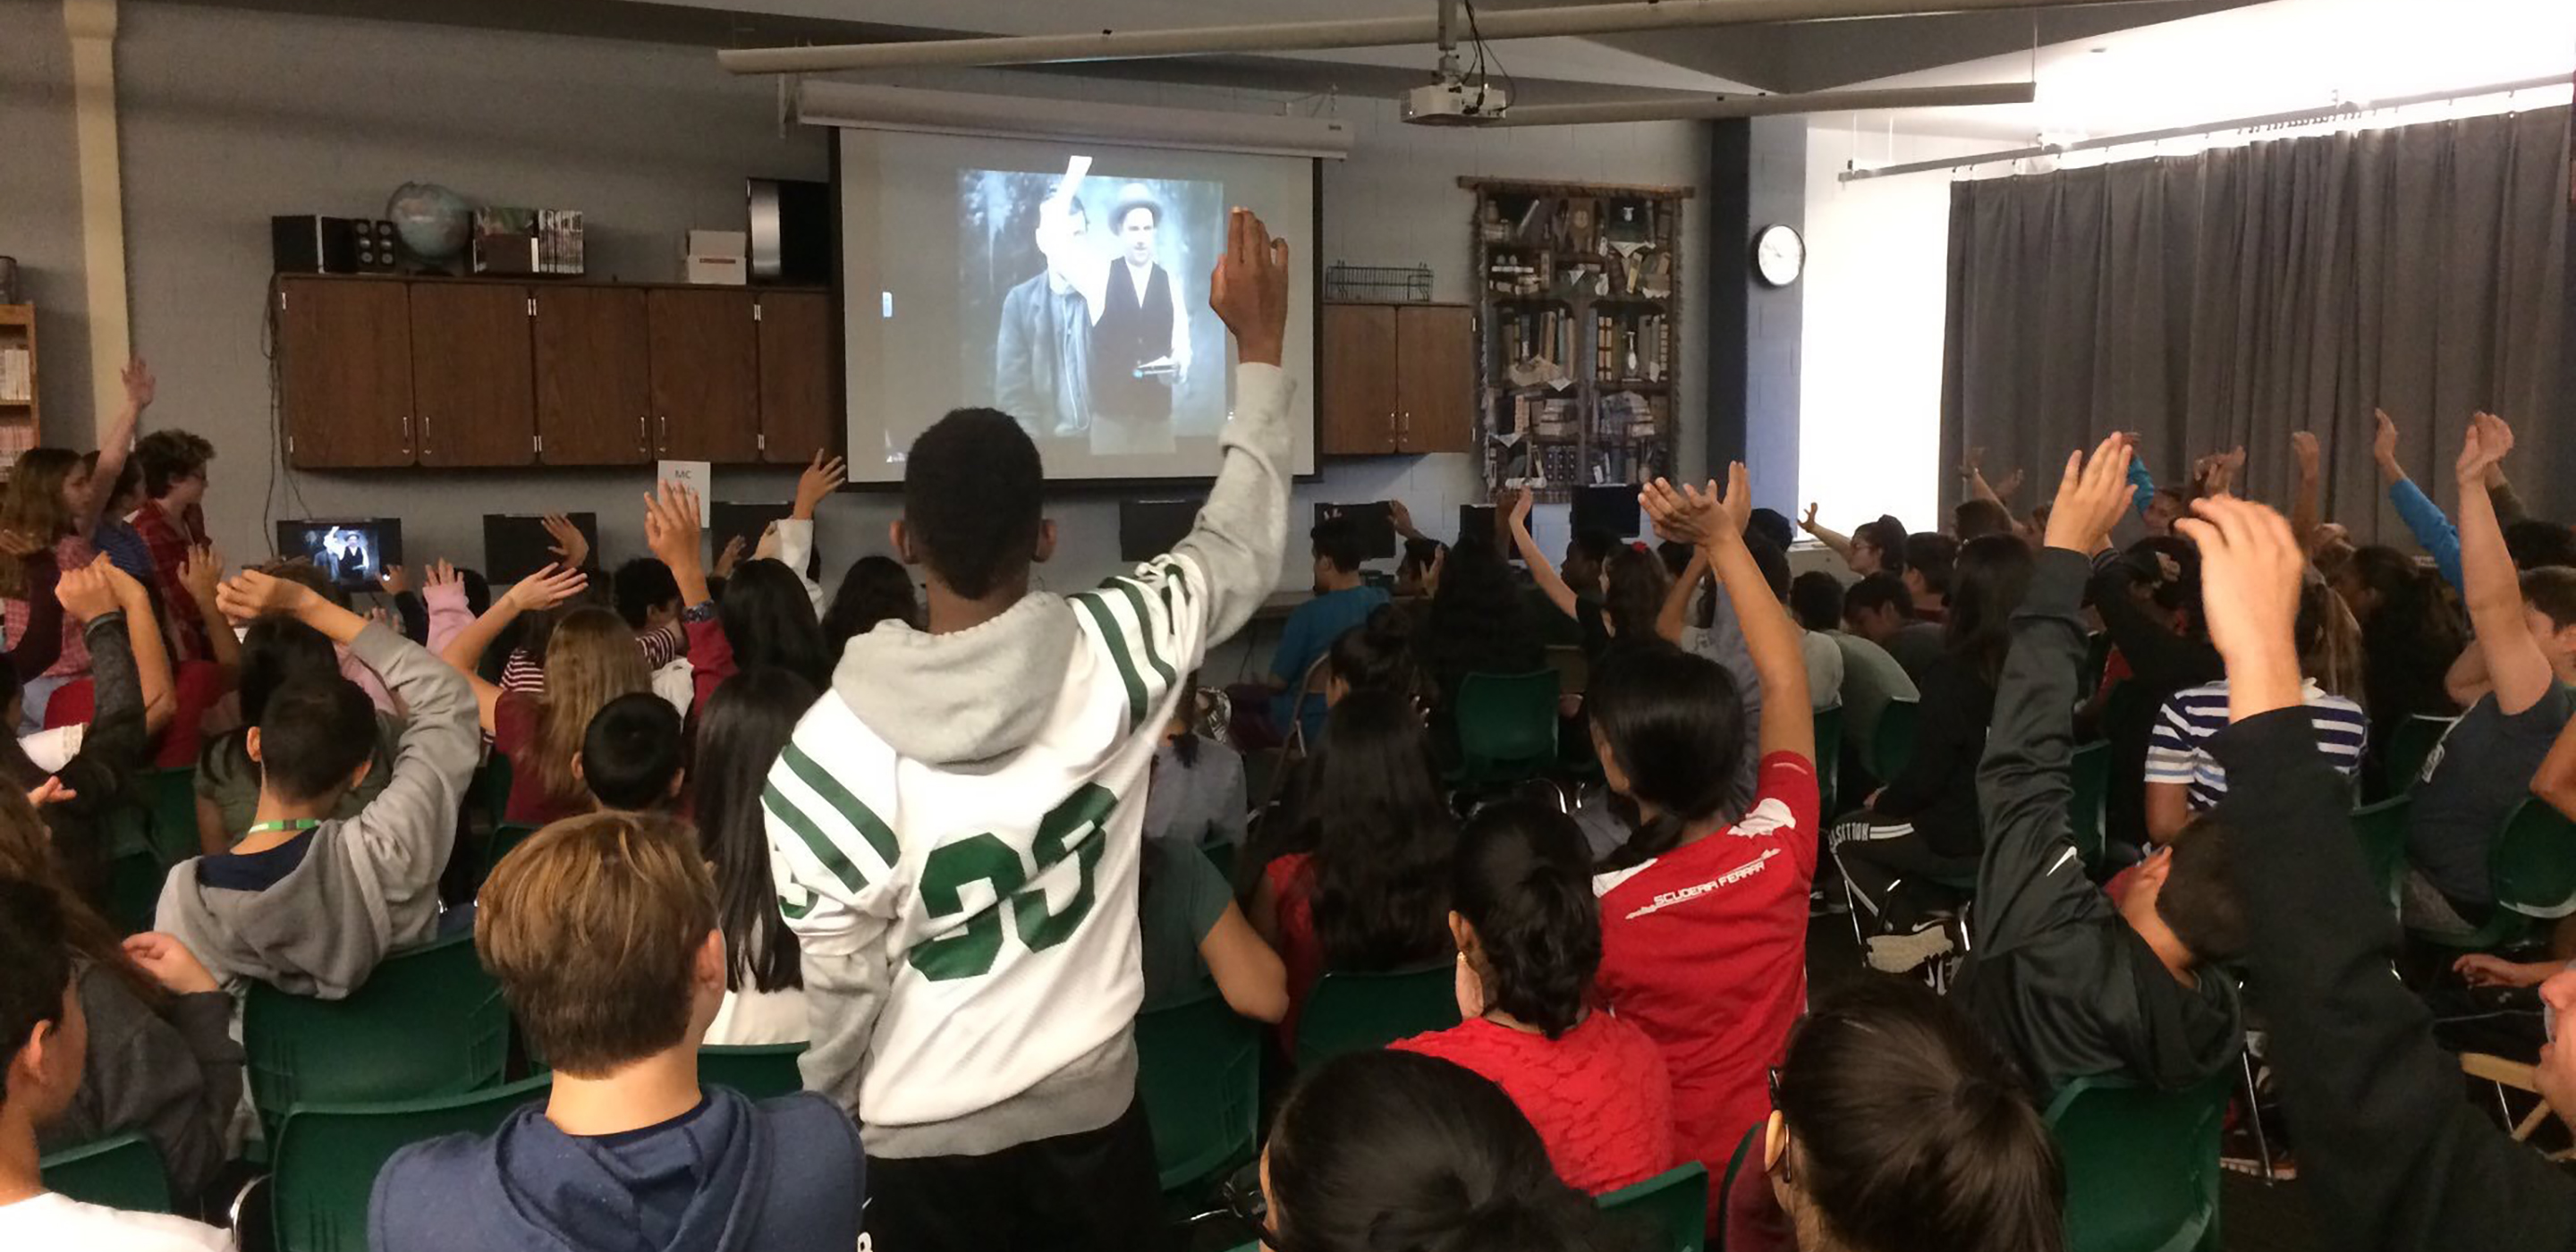 A large classroom full of students watching an actor portraying Detective McDevitt on a projector screen. Many students are raising their hands to participate.